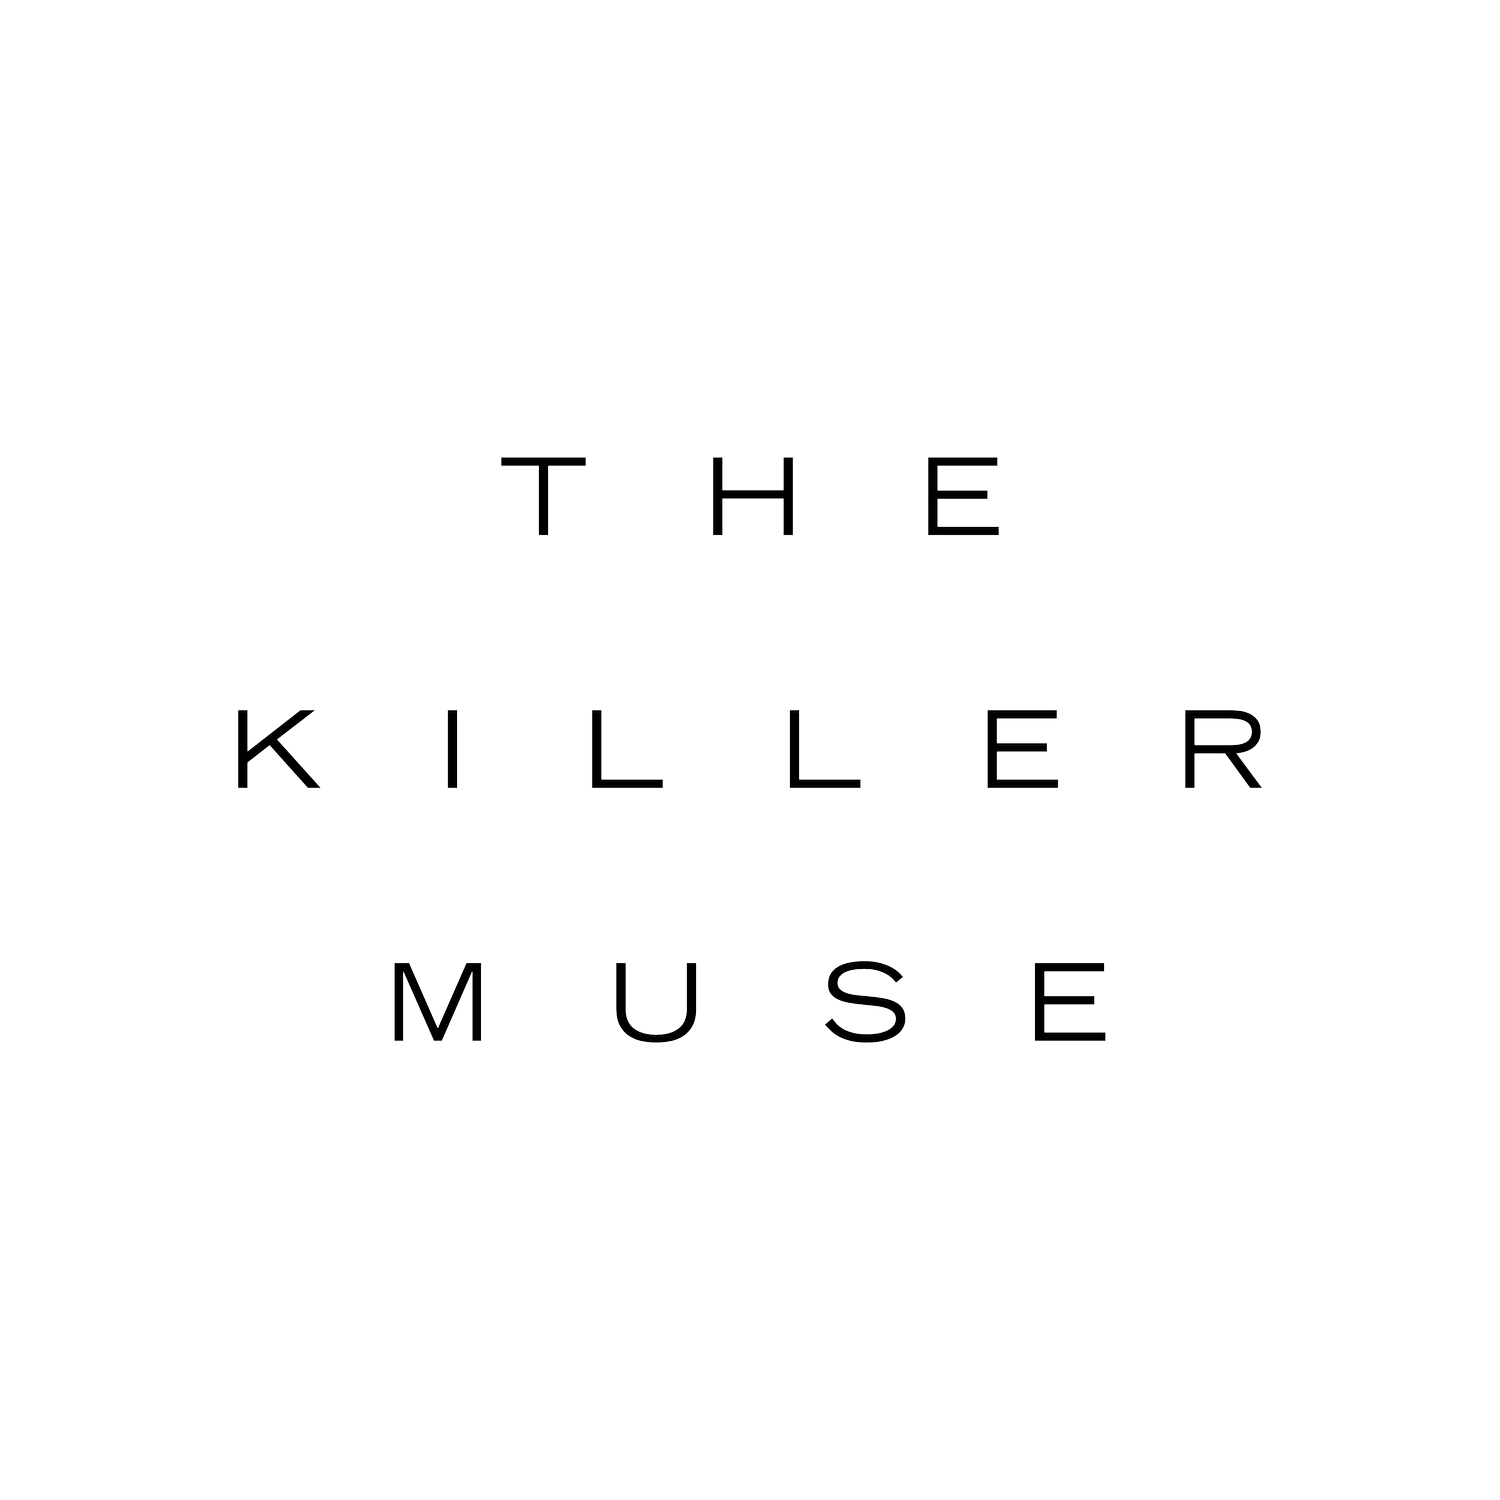 THE KILLER MUSE